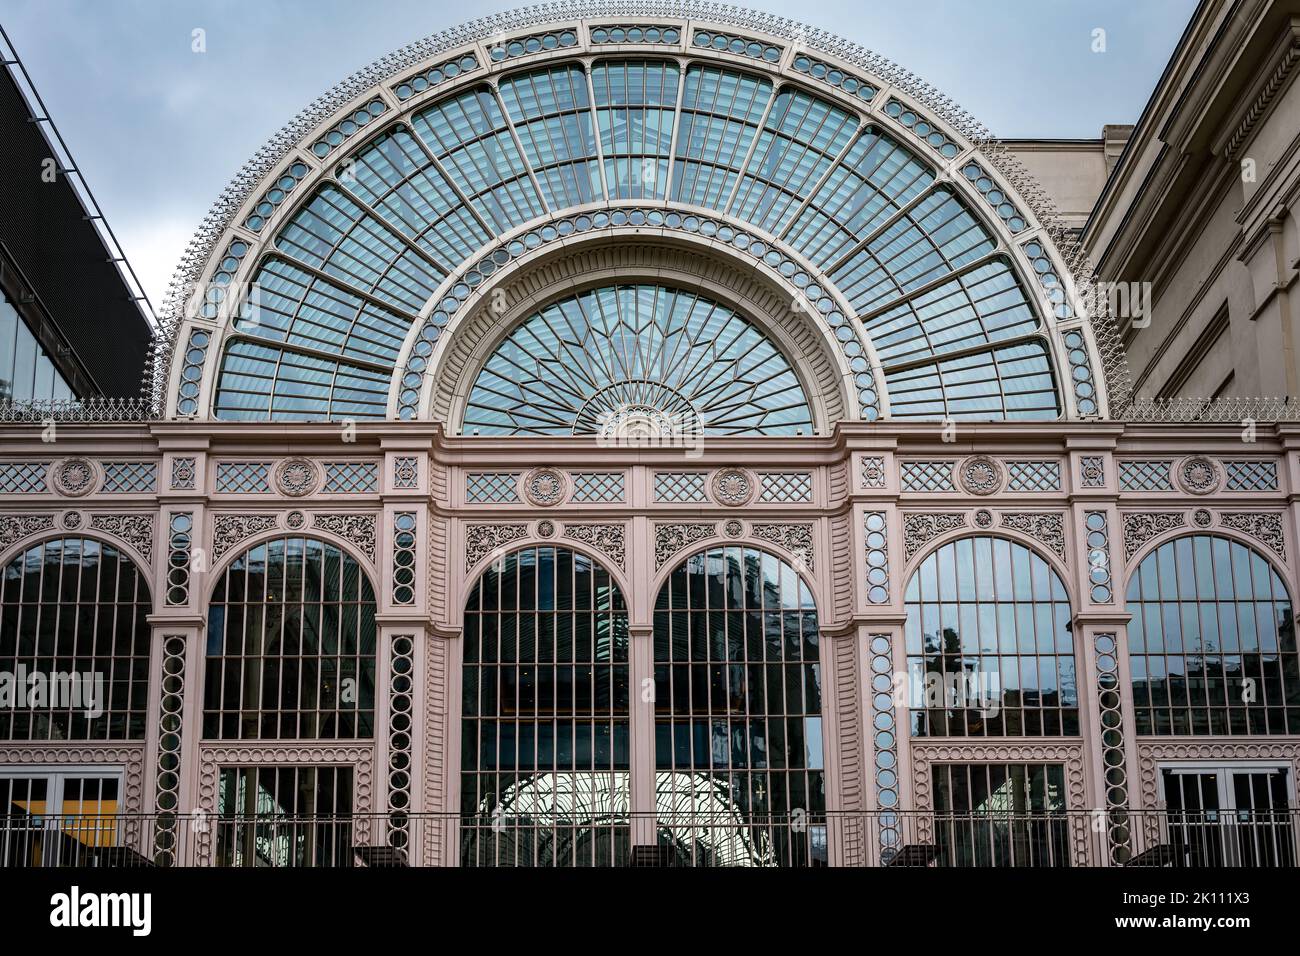 Floral Hall, a cast iron and glass Victorian structure, part of Covent Garden Royal Opera House, London, England Stock Photo